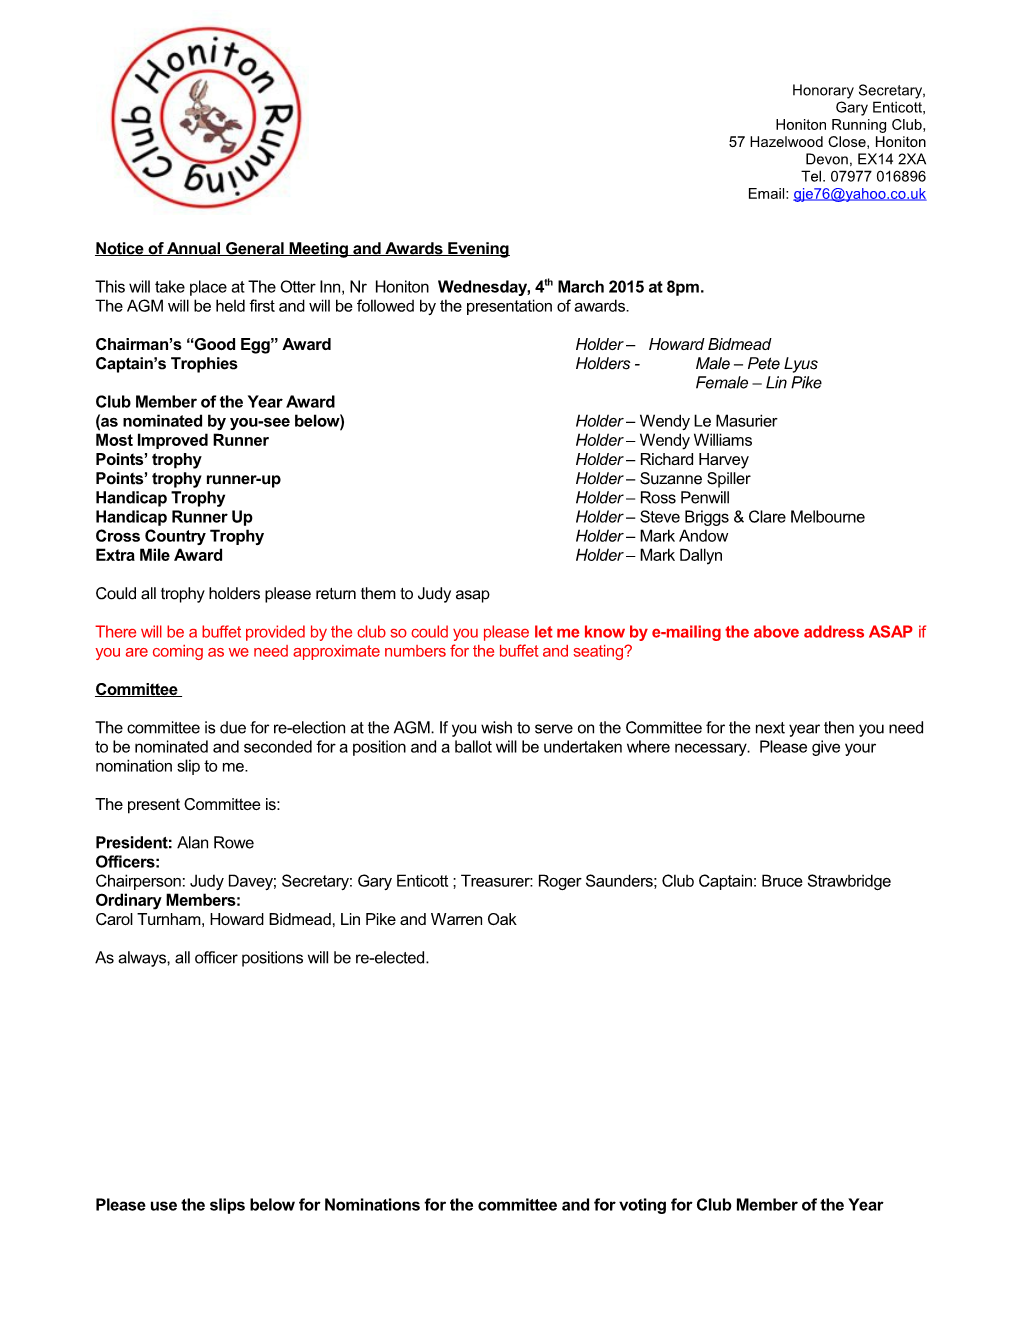 Notice of Annual General Meeting and Awards Evening